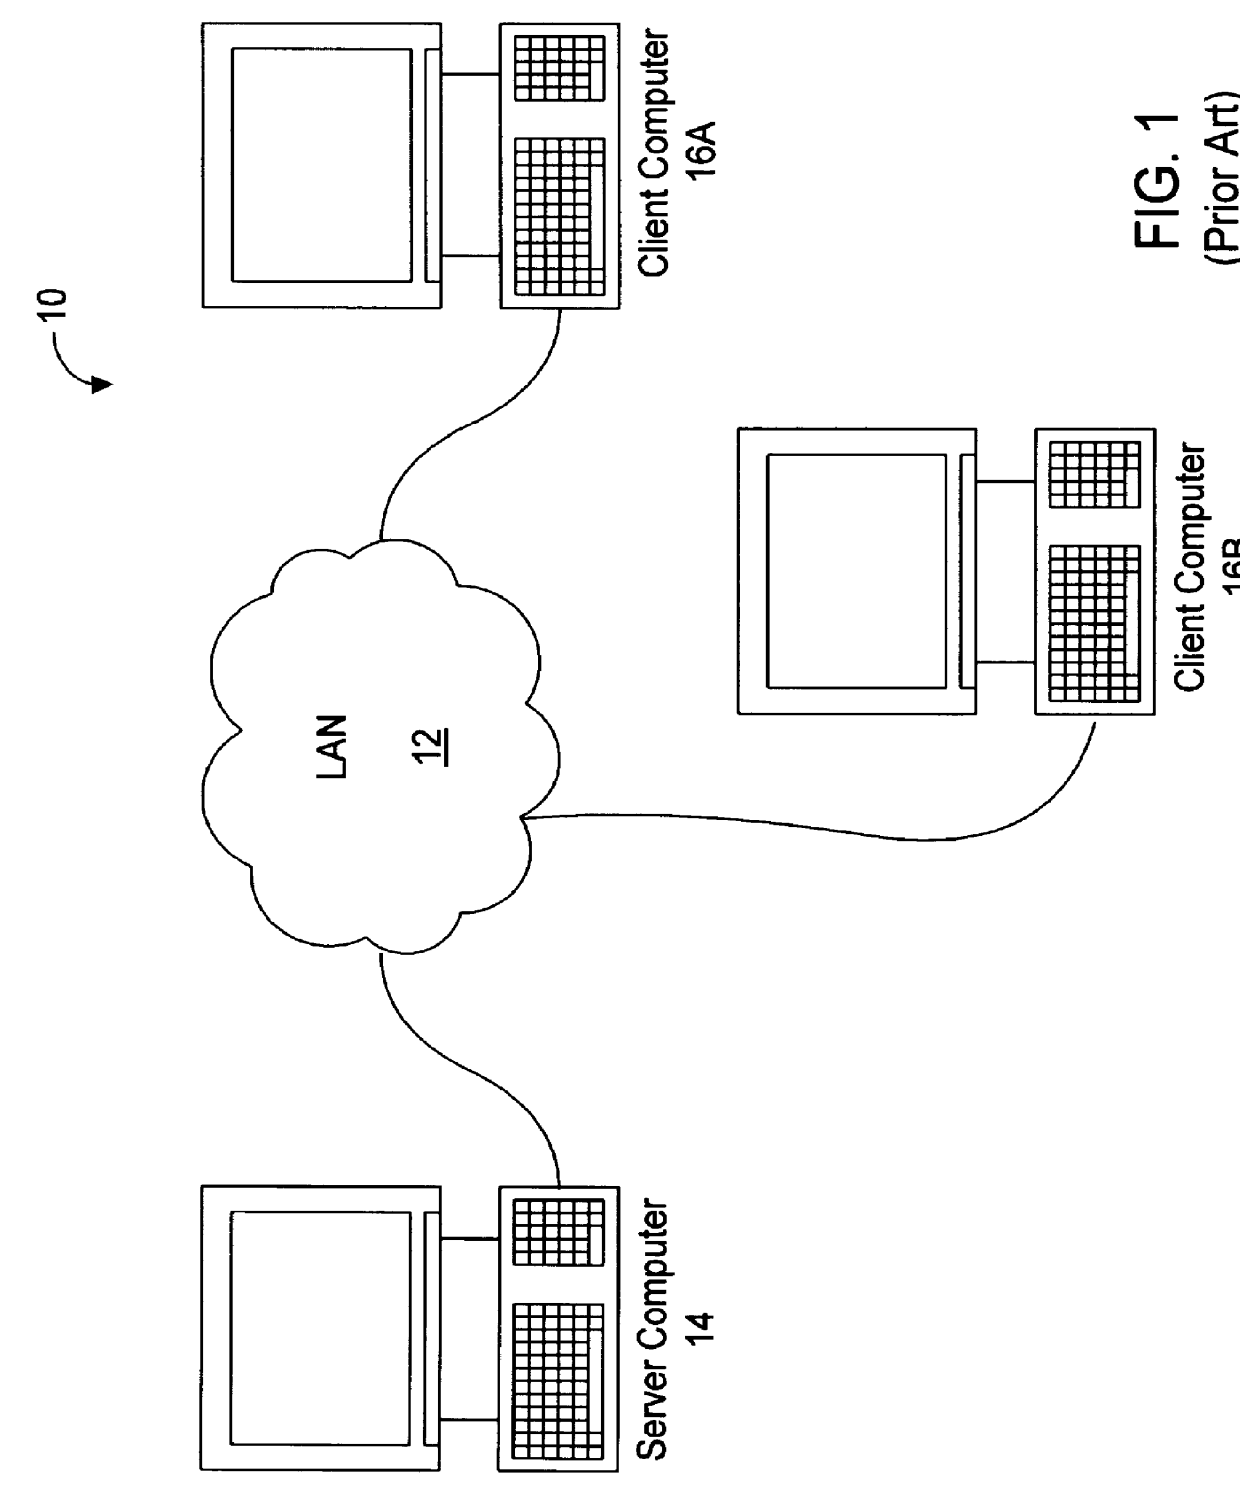 Auto-polling unit for interrupt generation in a network interface device